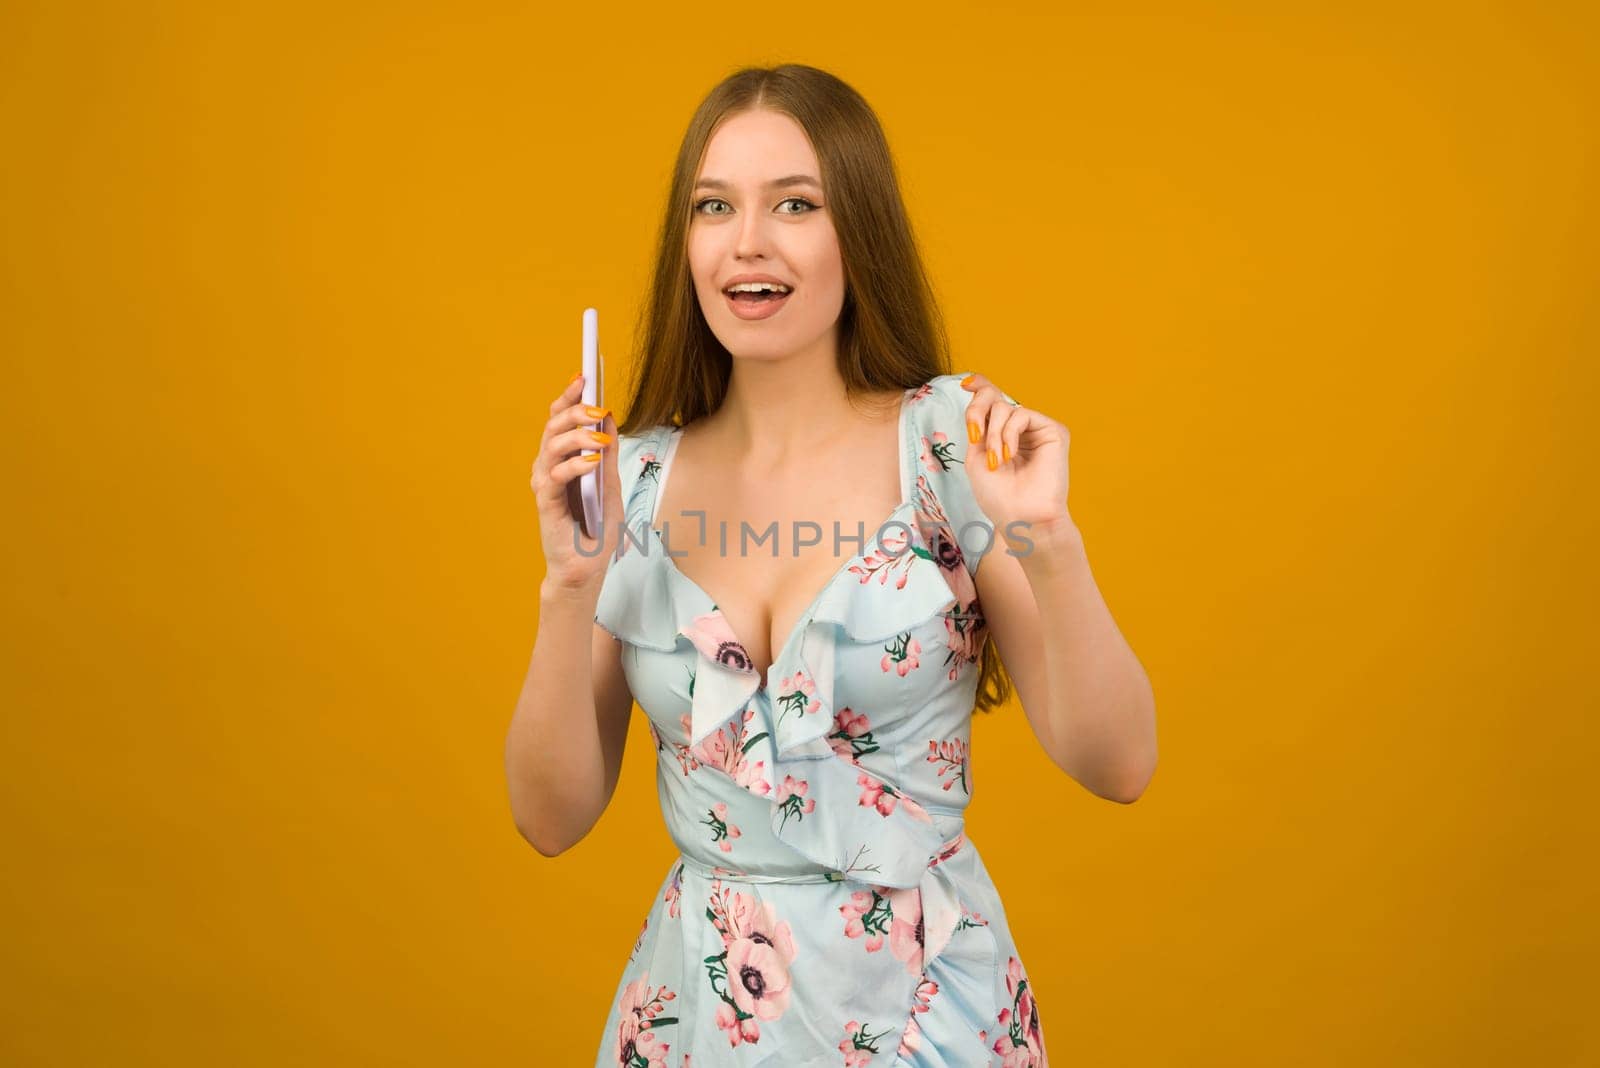 Young woman wears in sunner dress with flowers surprised by the news on a smartphone - image